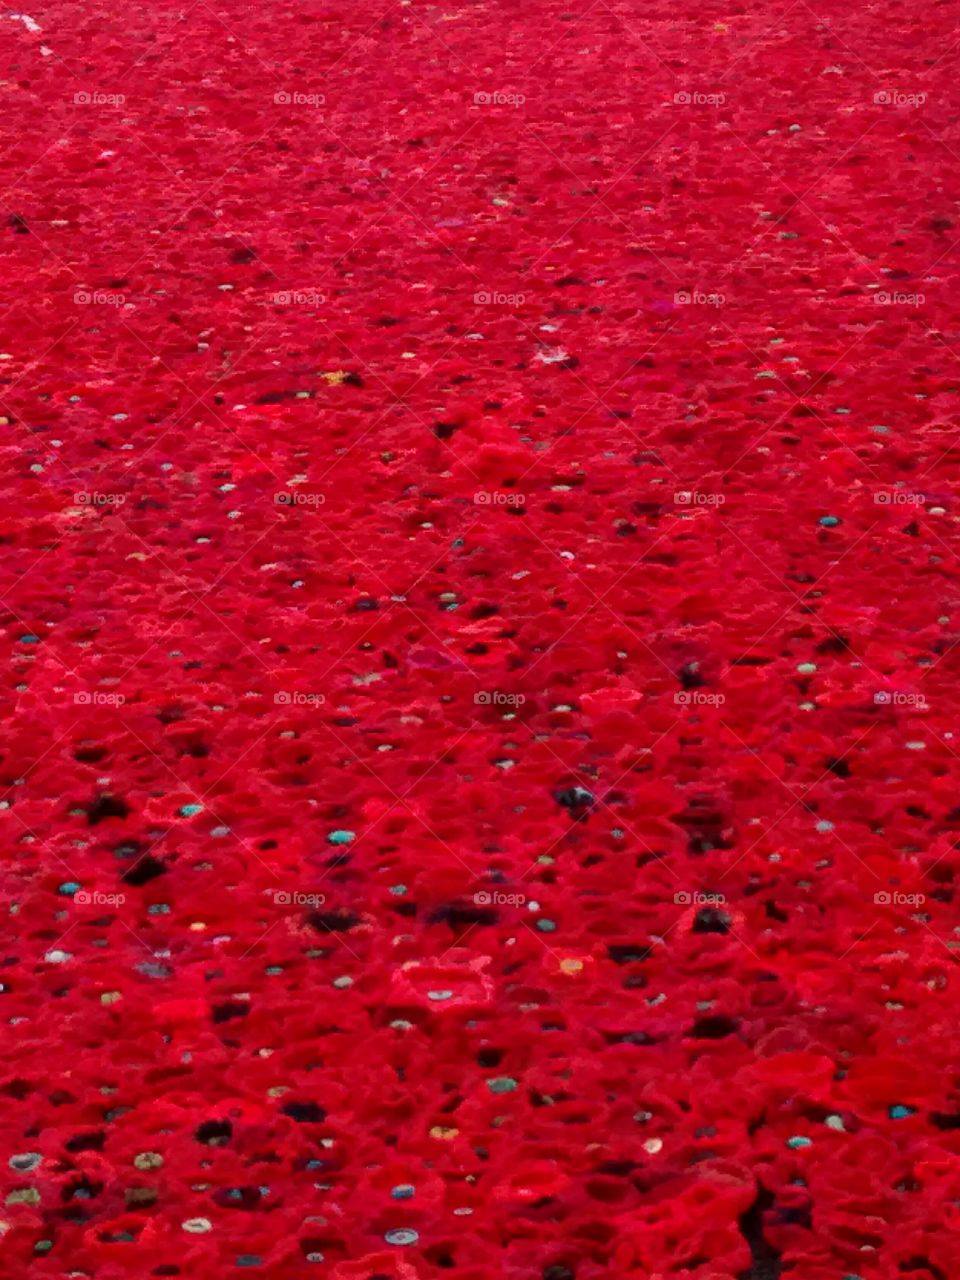 Red knitted poppies